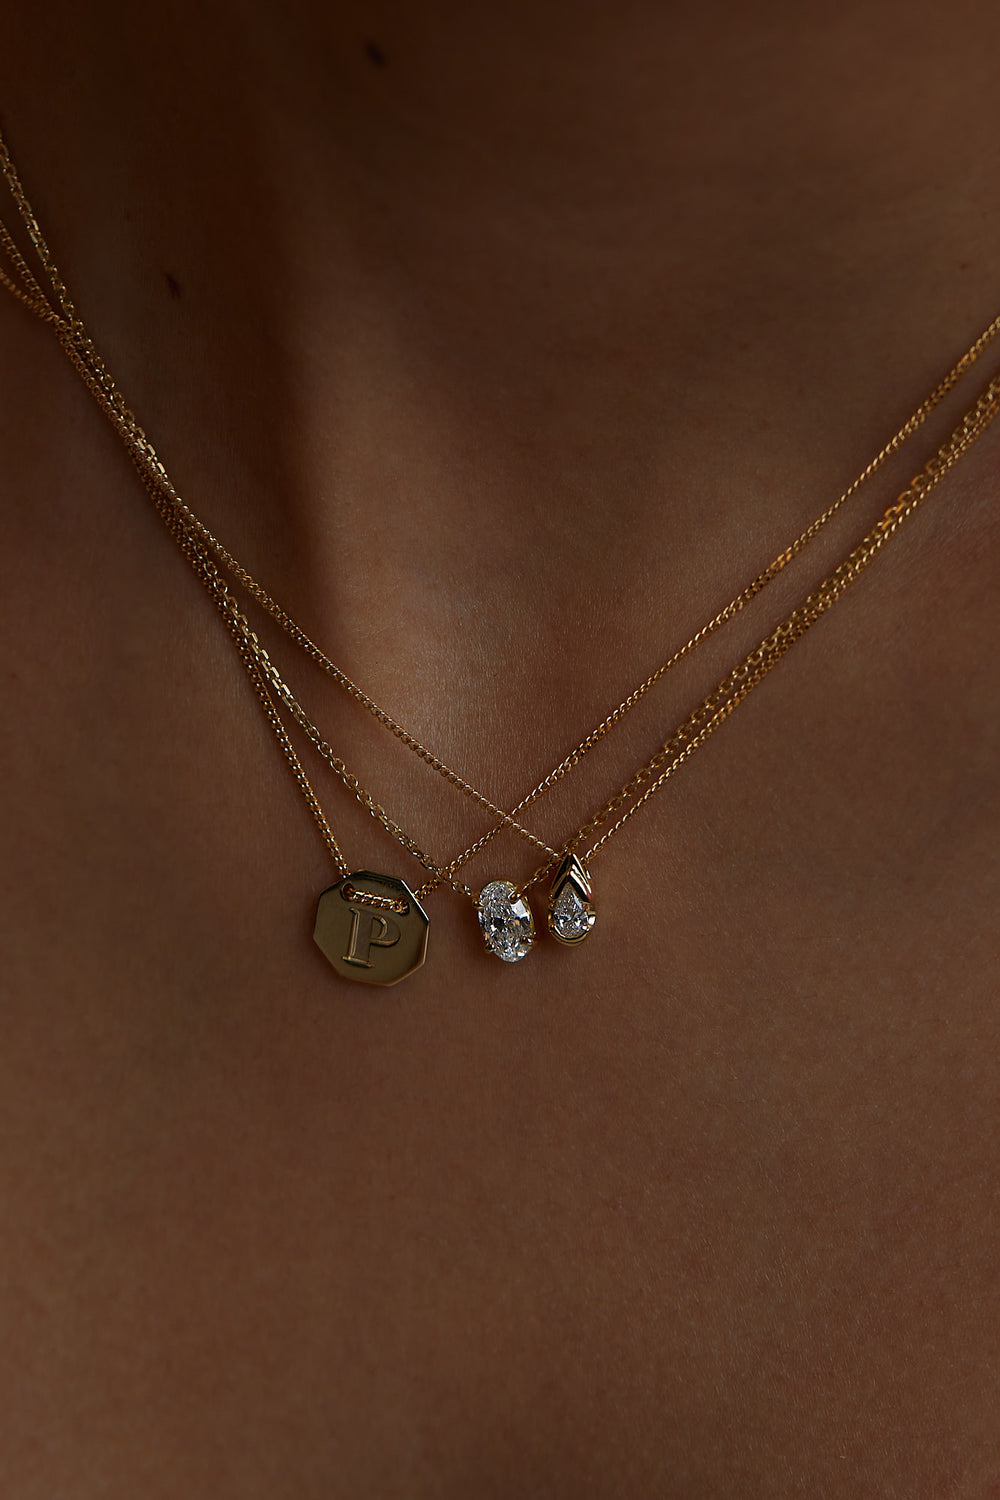 Mini Pear Diamond Necklace | 9K Yellow or Rose Gold